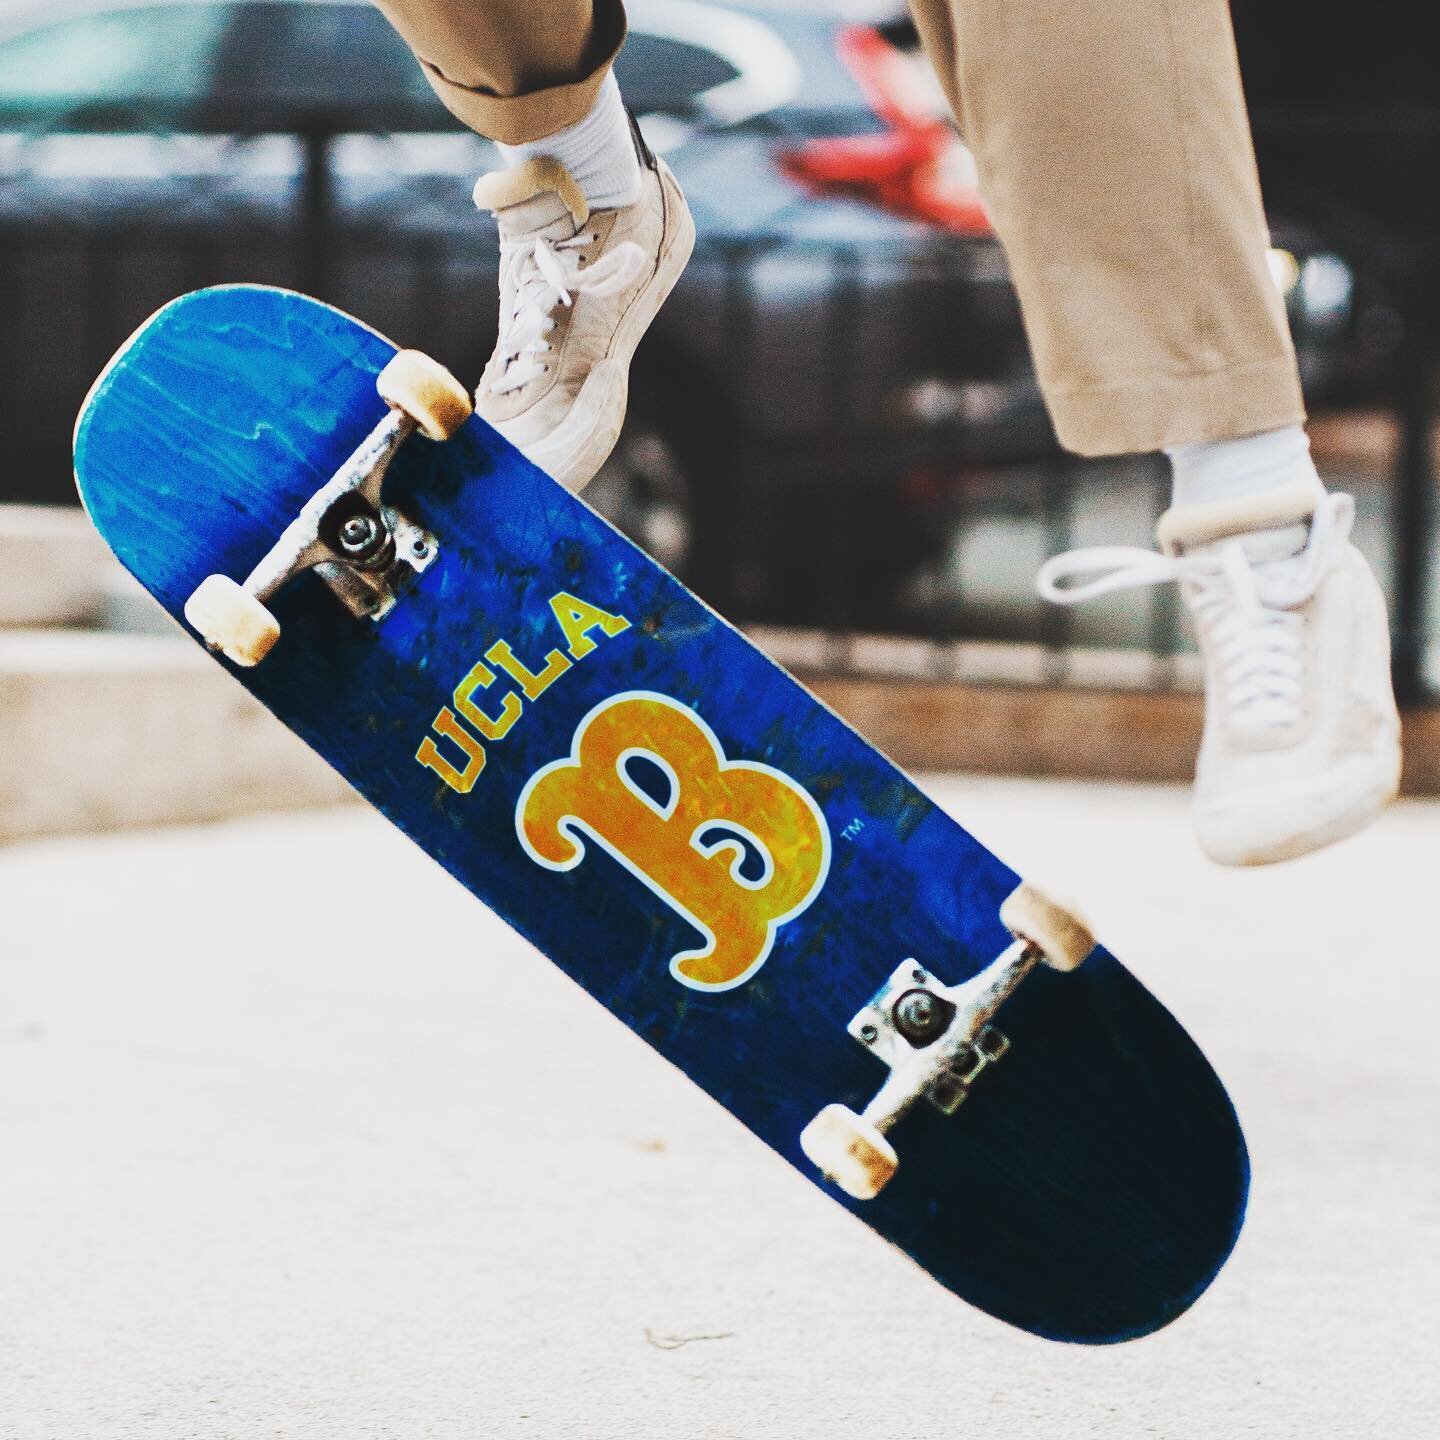 More than a logo&hellip;it&rsquo;s a lifestyle💙🐻💛

#uclabruins #ucla #uclalifestyle #uclabound #skateboard #sports #skater #skateboarddesign #photoshopedit #design #boarddesign #trademark #logo #logodesigns